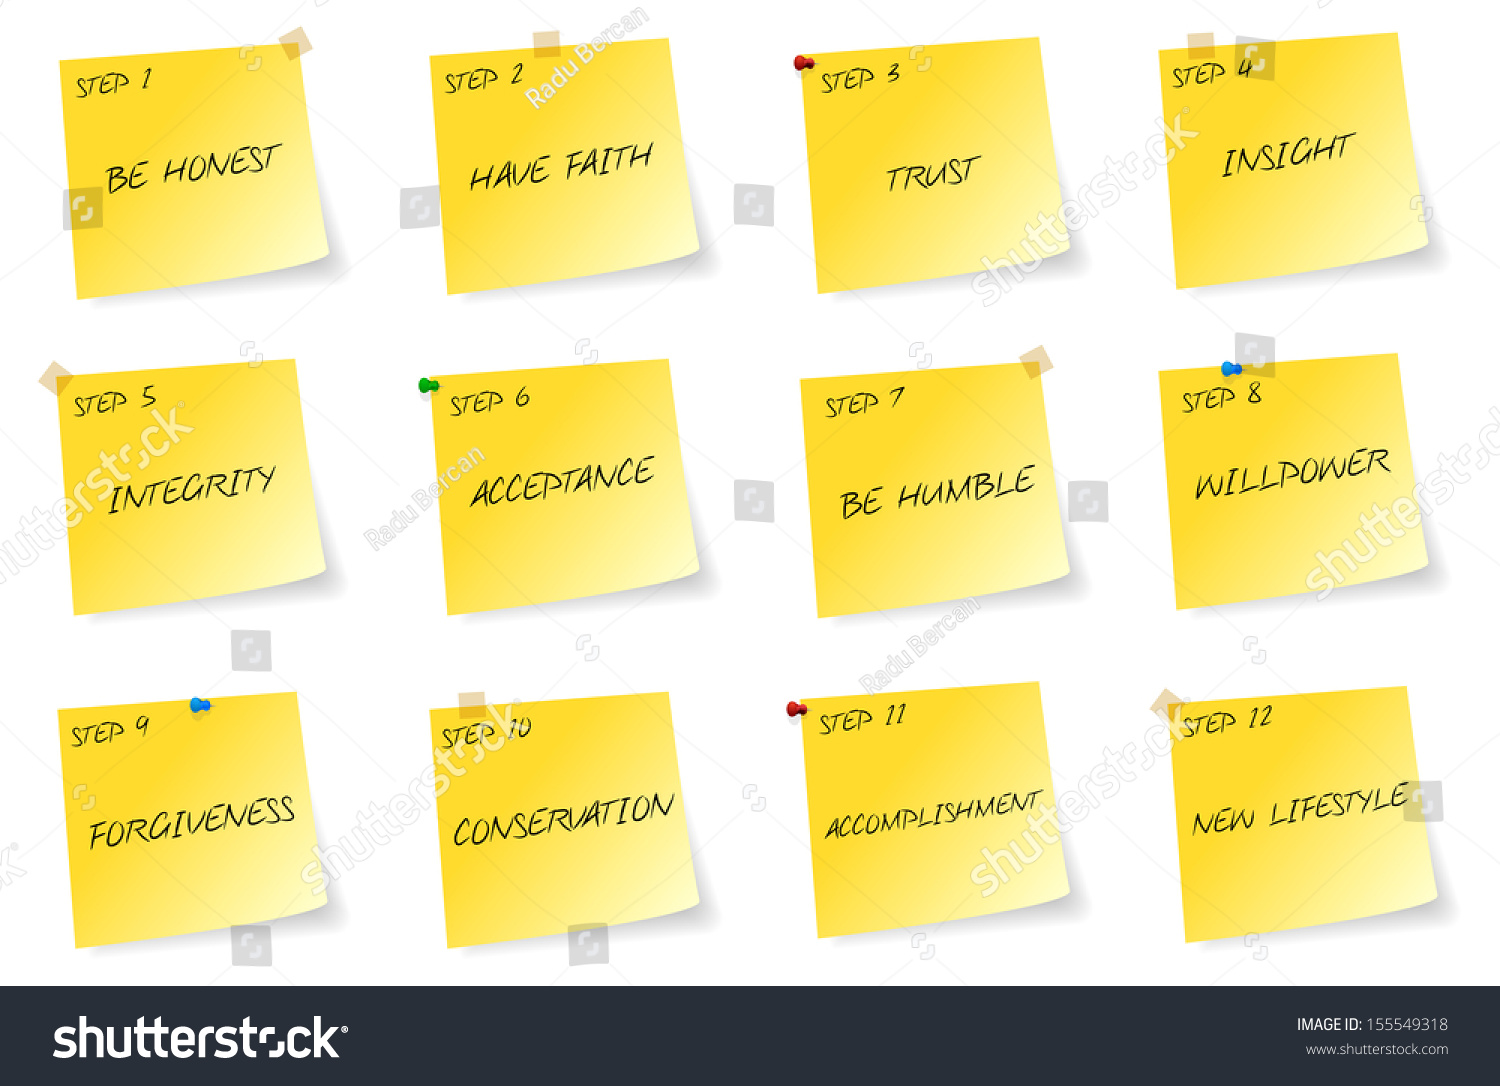 SVG of Yellow Stickers With The Twelve Steps Of The Alcoholic Anonymous Program svg